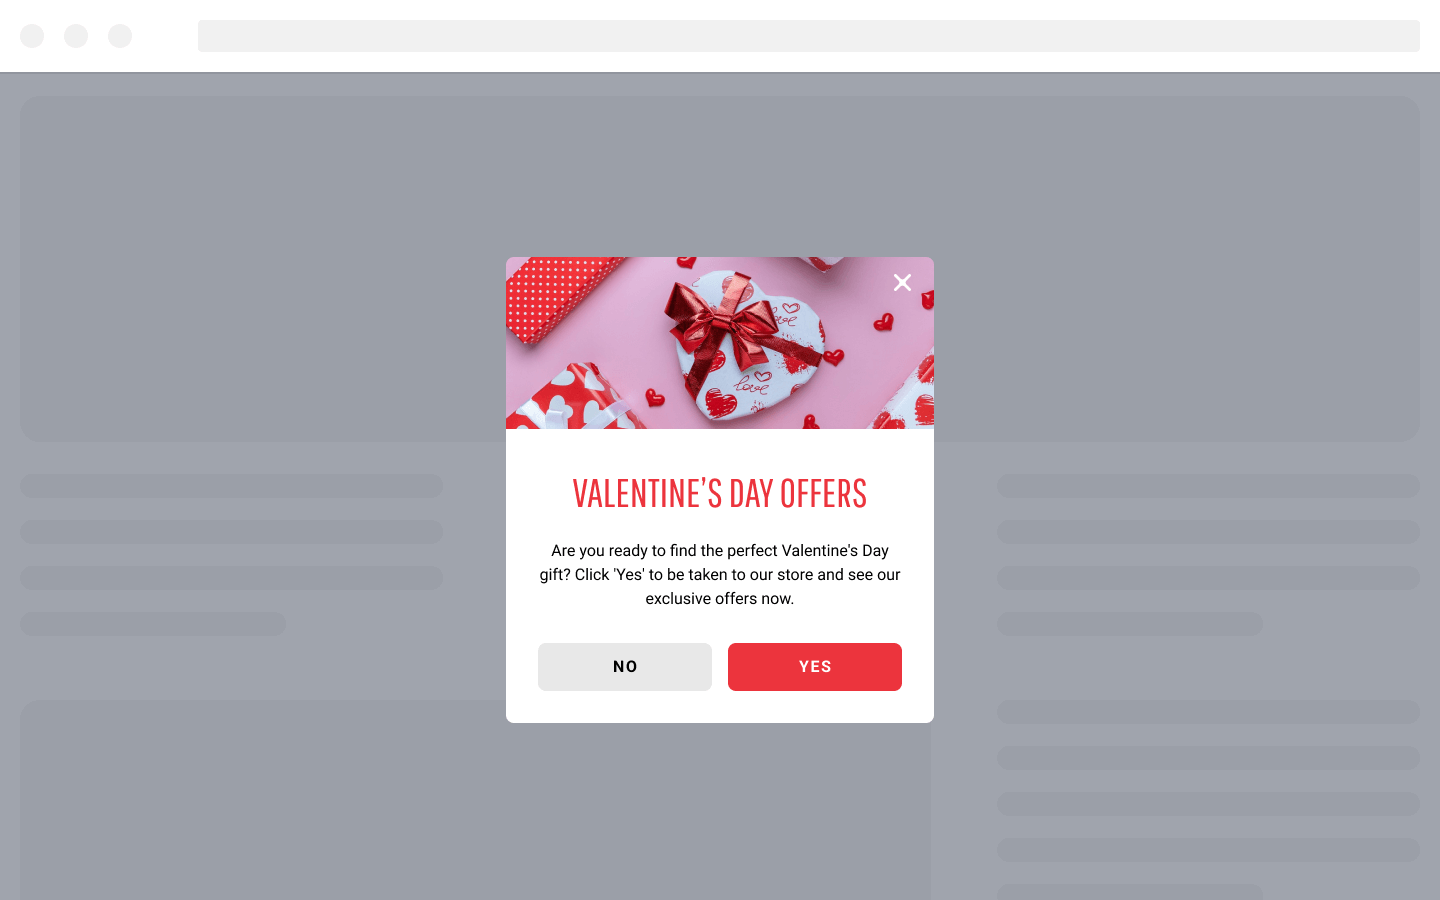 Engage with Visitors on Valentine’s Day with a Yes / No Popup